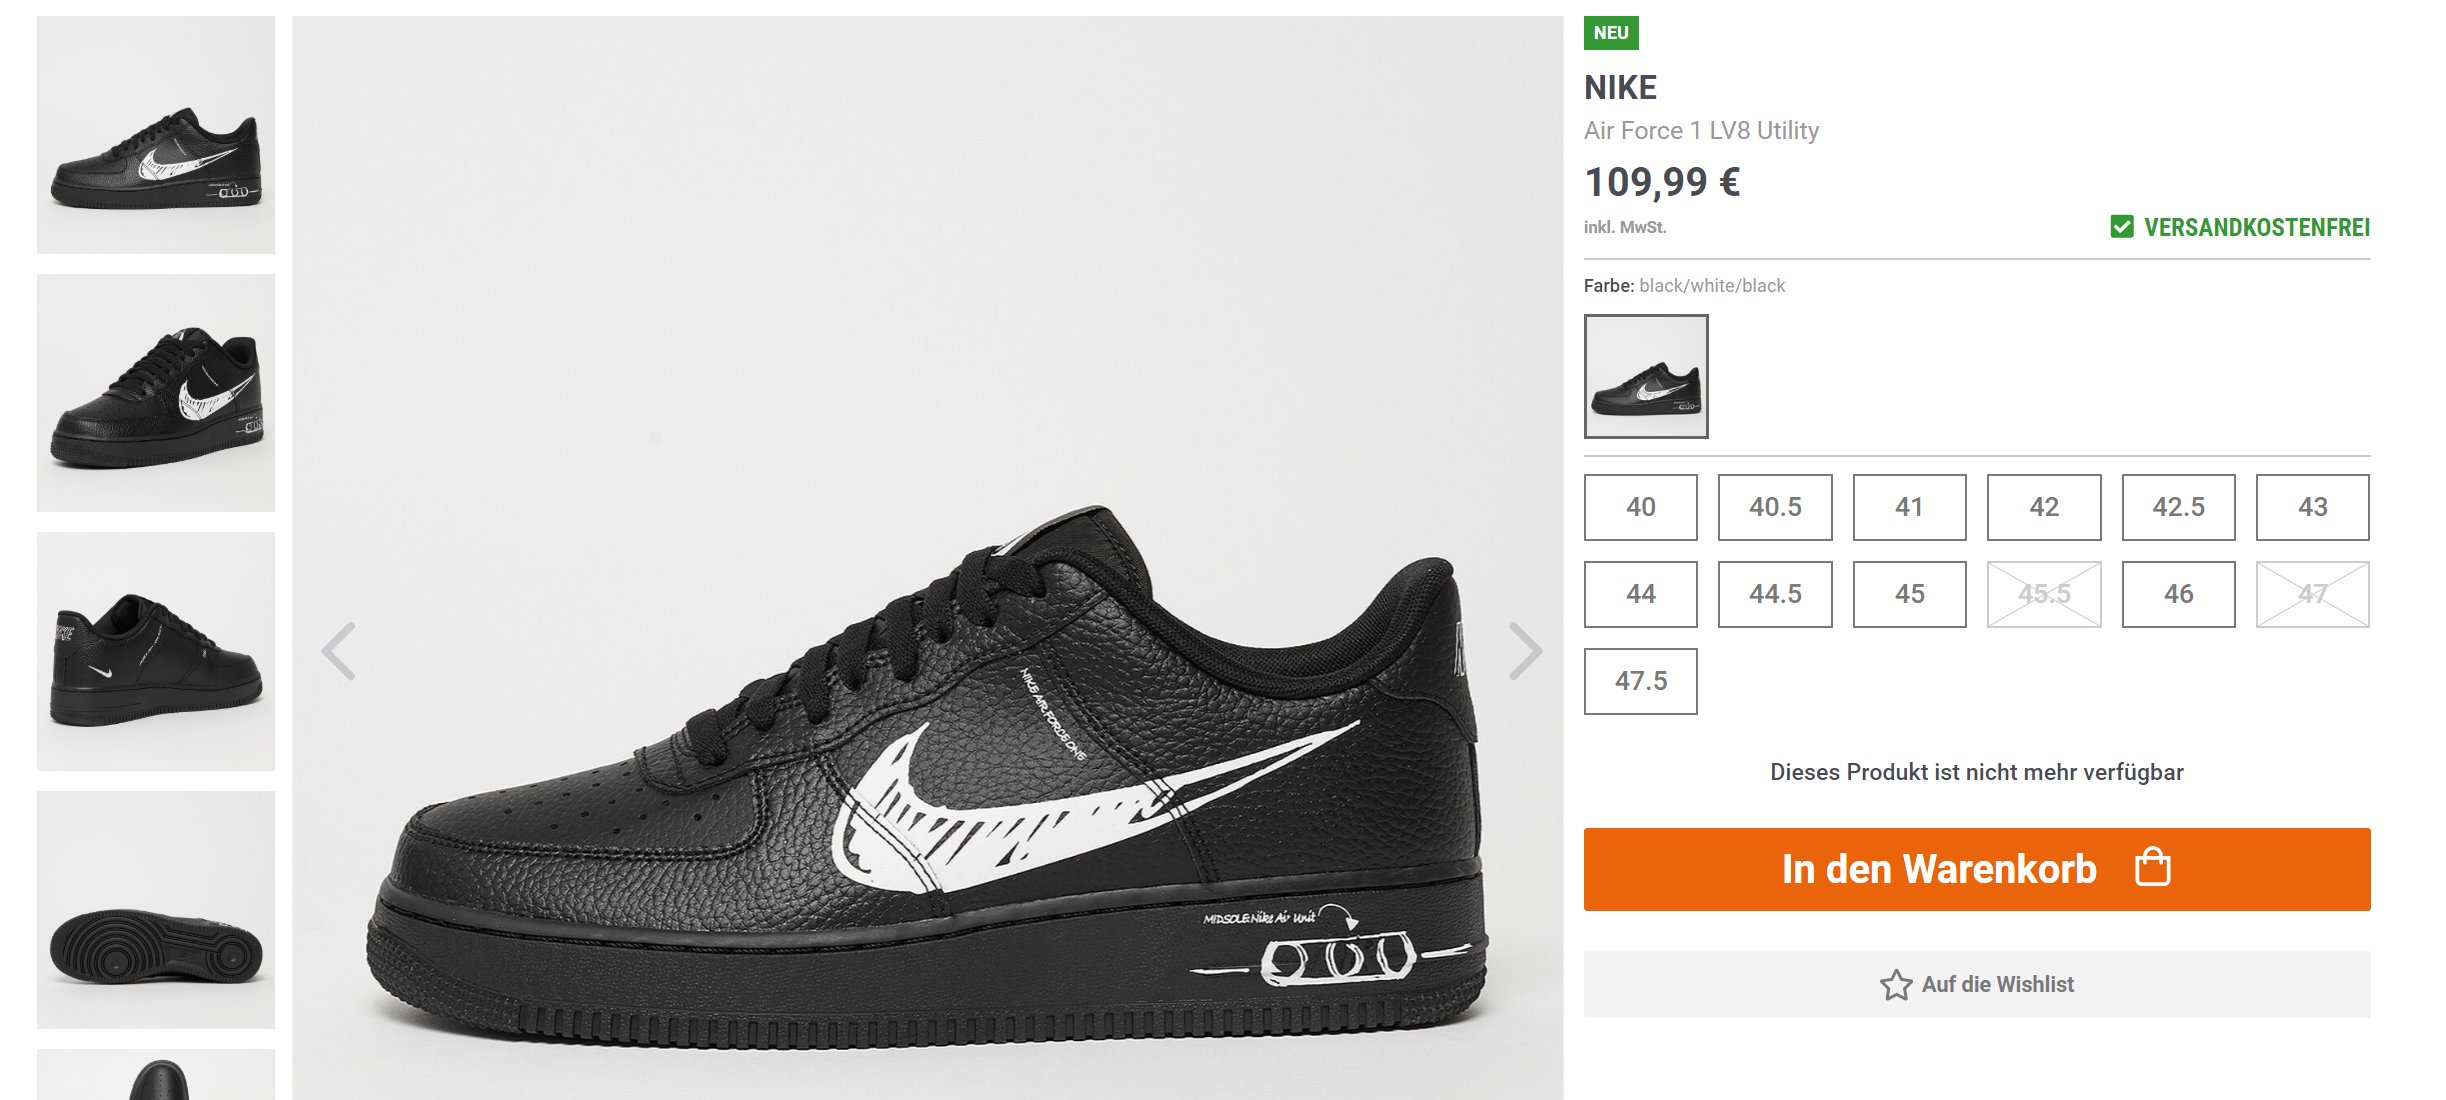 MoreSneakers.com on Twitter: "EU ONLY : Nike Air Force 1 'Black' – Sketch Pack RESTOCK on Snipes EU =&gt;https://t.co/xDVgmN79CR Twitter